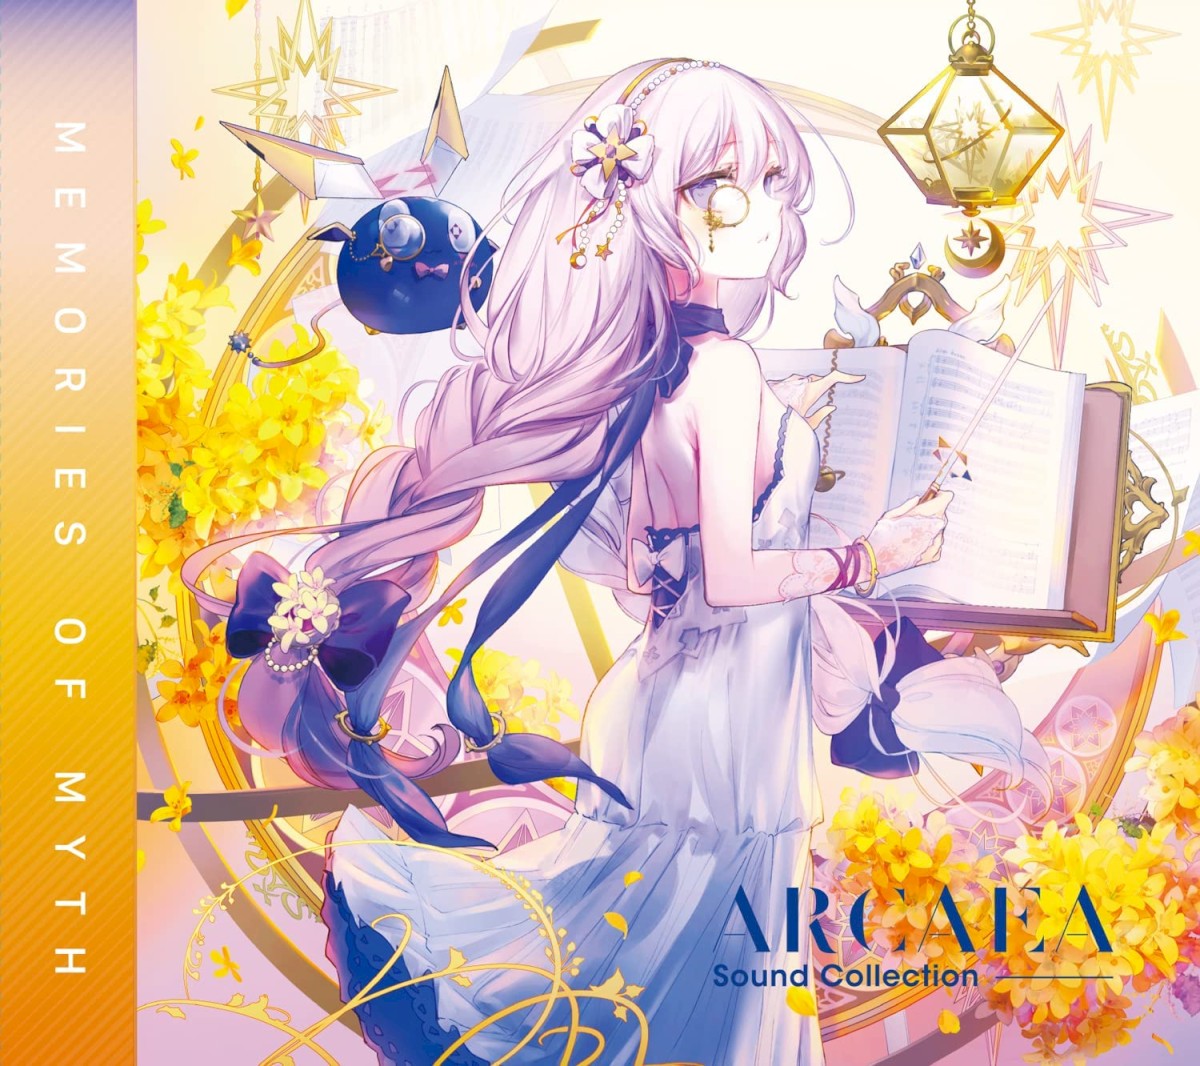 Release “Arcaea Sound Collection - Memories of Myth” by Various Artists ...